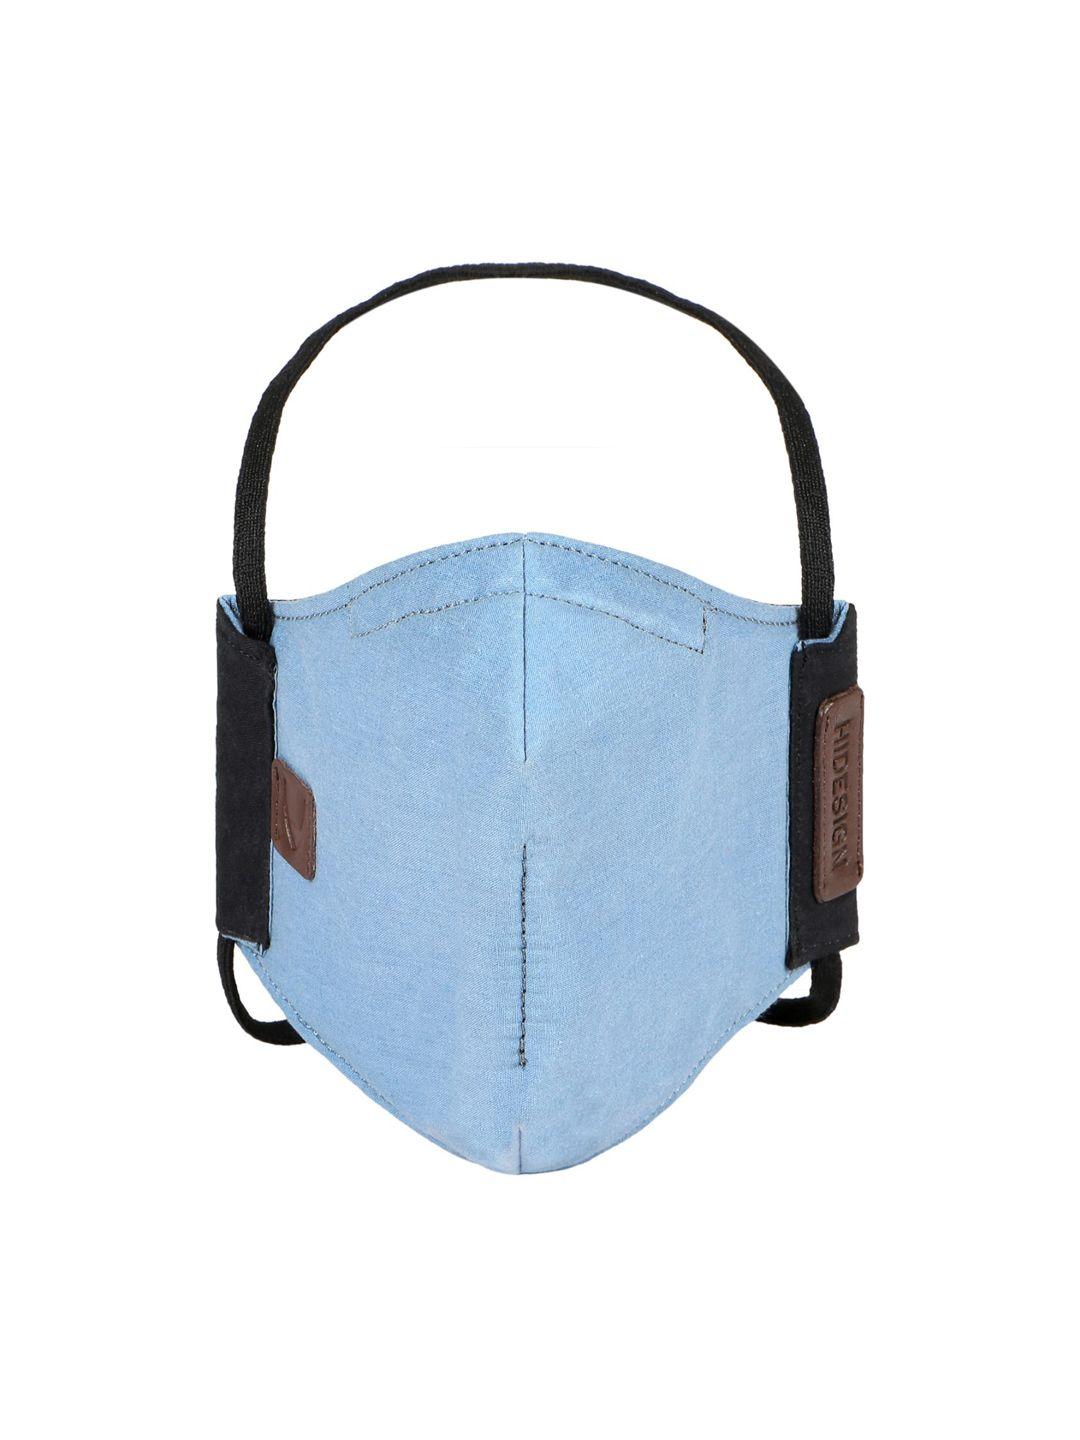 hidesign-unisex-blue-5-ply-reusable-protective-outdoor-mask